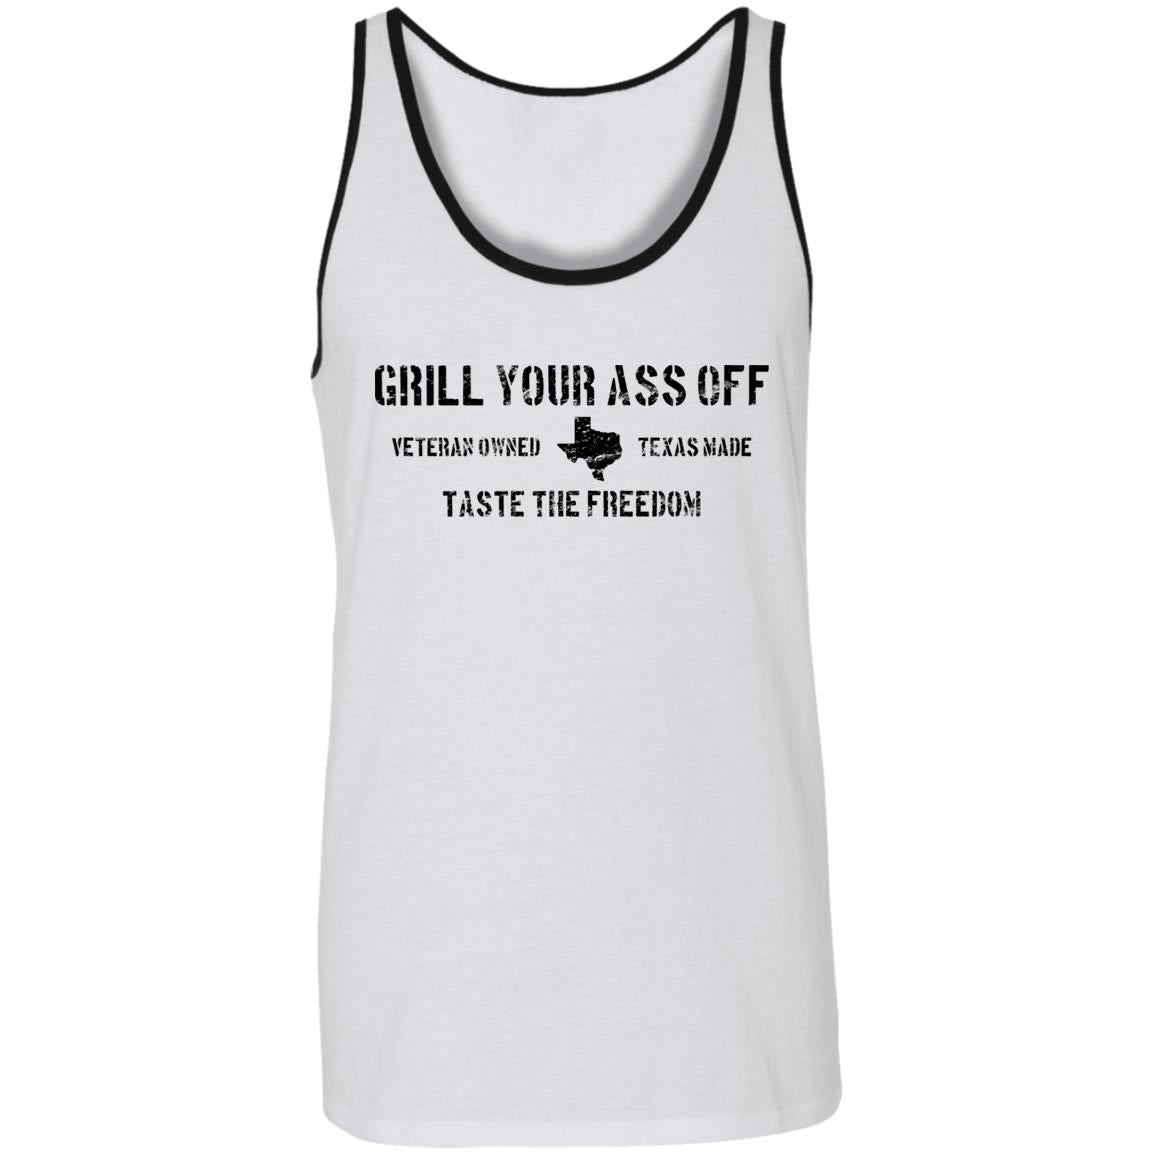 Taste The Freedom - Grill Your Ass Off